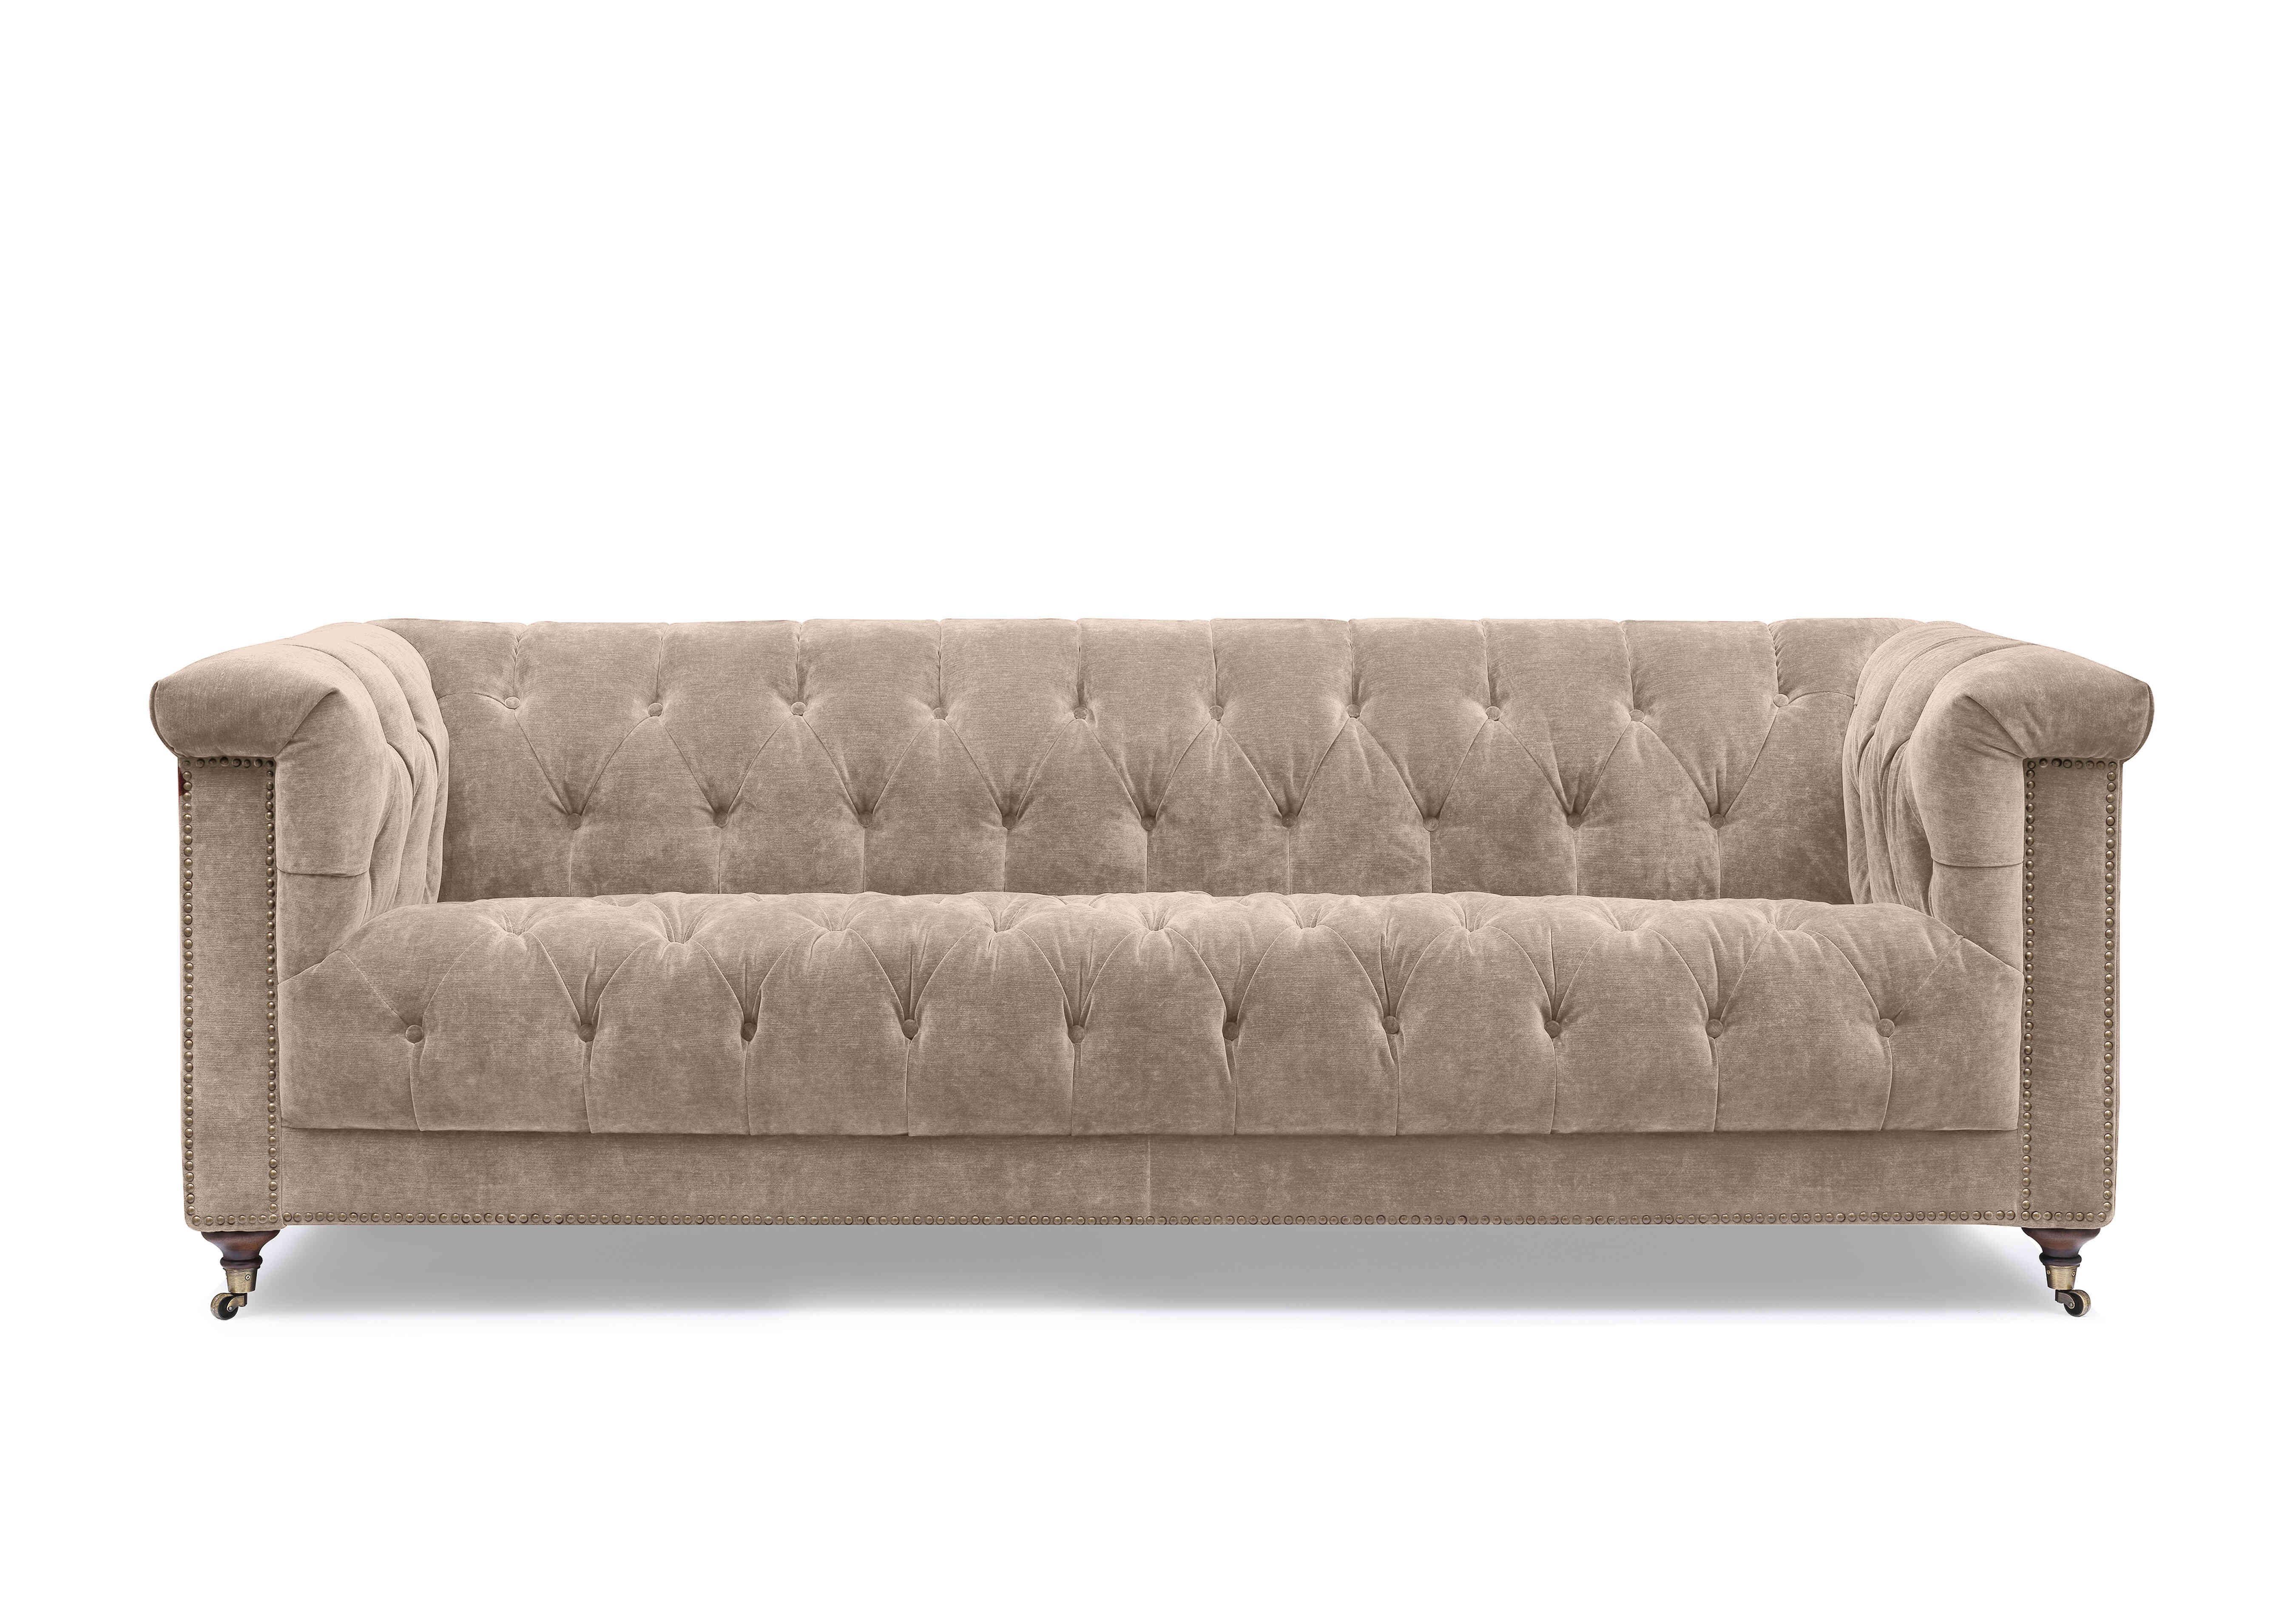 Wallace 4 Seater Fabric Chesterfield Sofa in X3y1-W022 Barley on Furniture Village